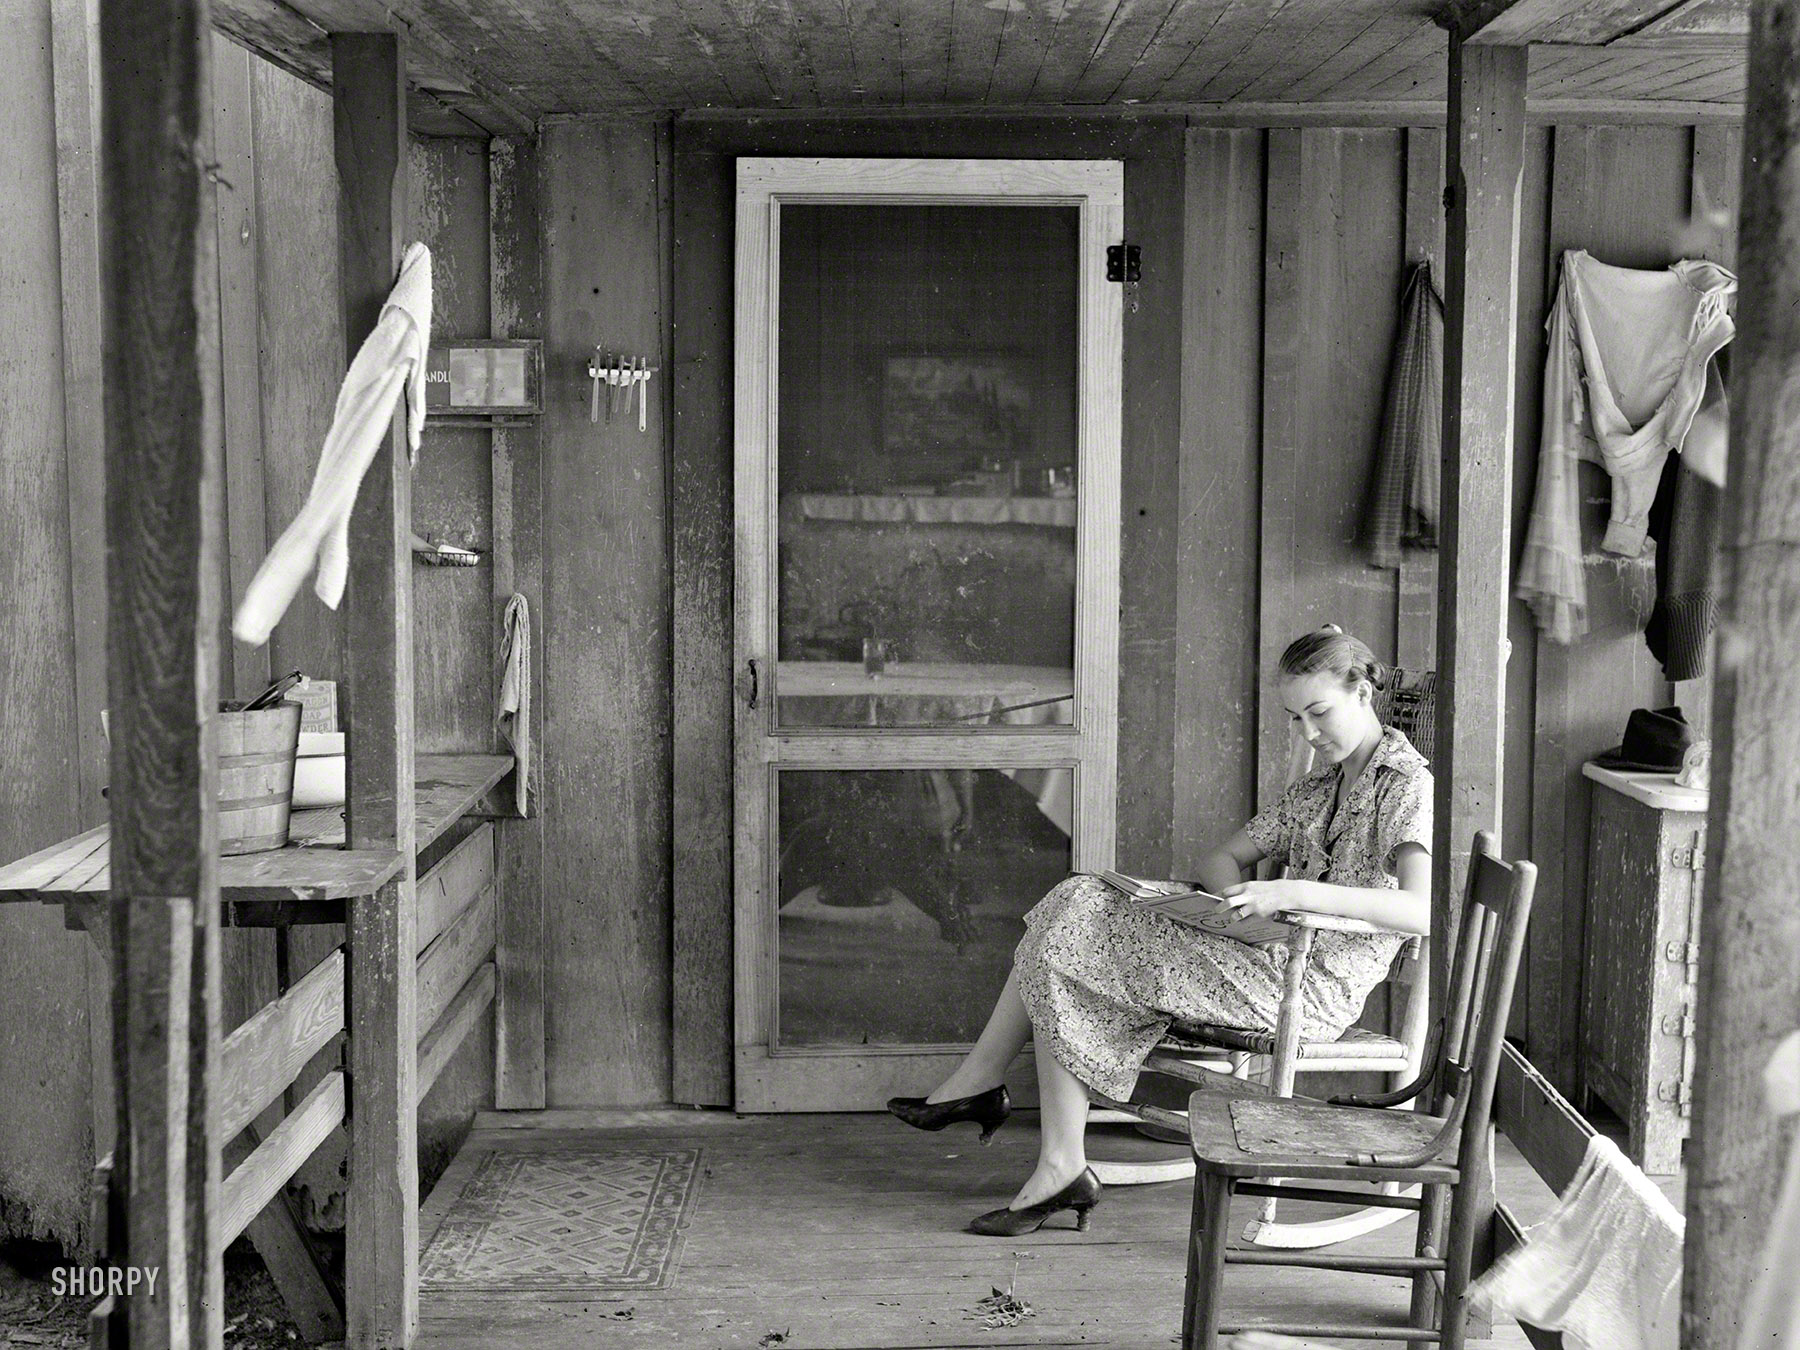 September 1935. "Daughter of resettled farmer, father living temporarily at the jail in Irwinville Farms, Georgia, while new homes are being built." Photo by Arthur Rothstein for the Resettlement Administration. View full size.